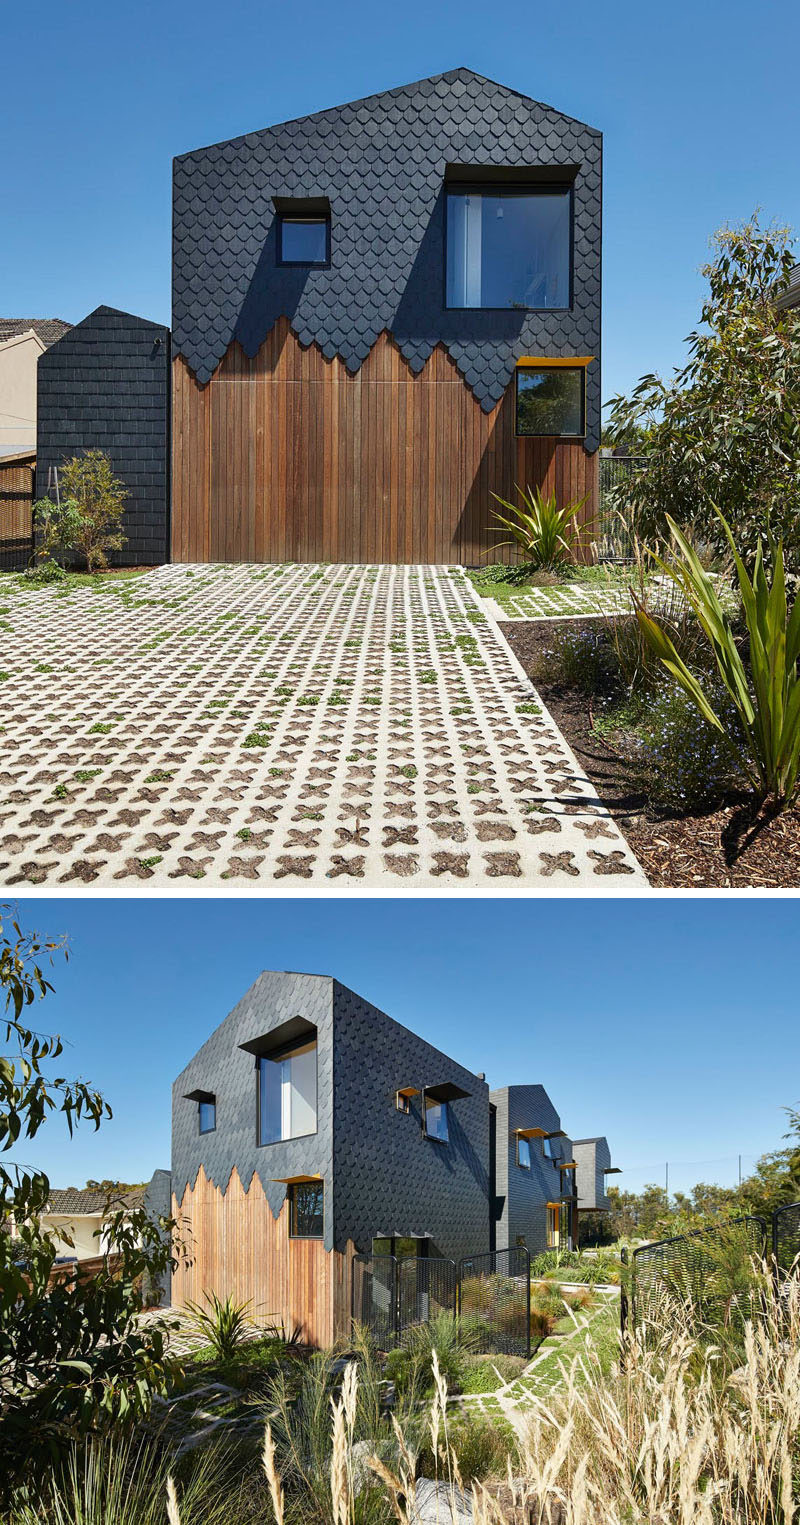 Covering the exterior of this modern house are dark grey slate tiles in a couple of different patterns, with some sections having a staggered finish to show the wood underneath, especially at the side of the home where the garage is located.